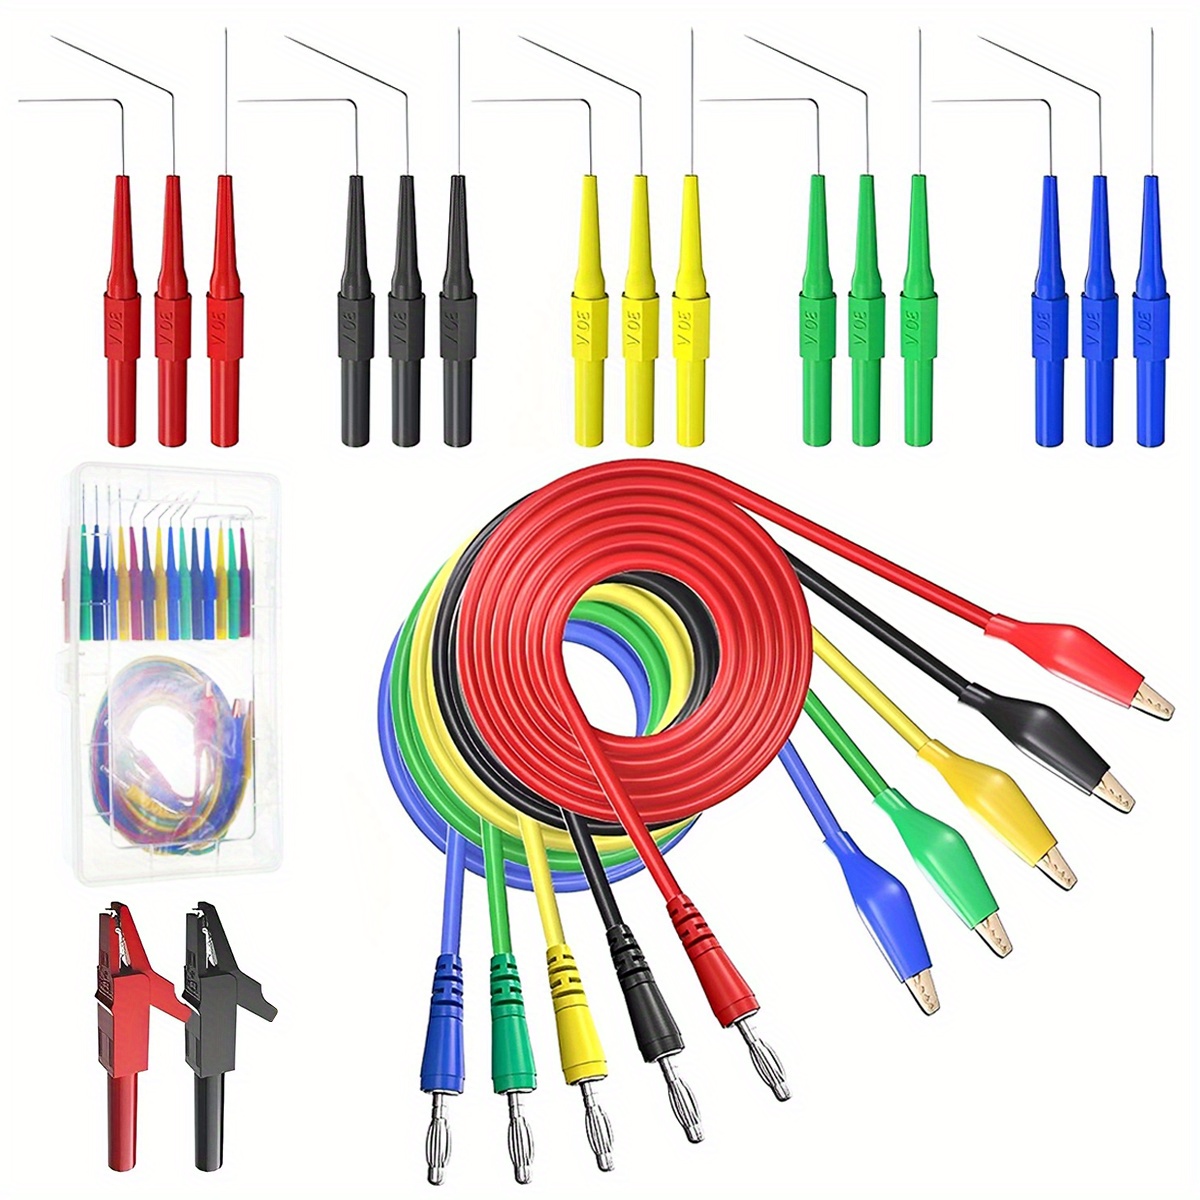 Multimeter Probes - Needle Tipped from MindKits New Zealand